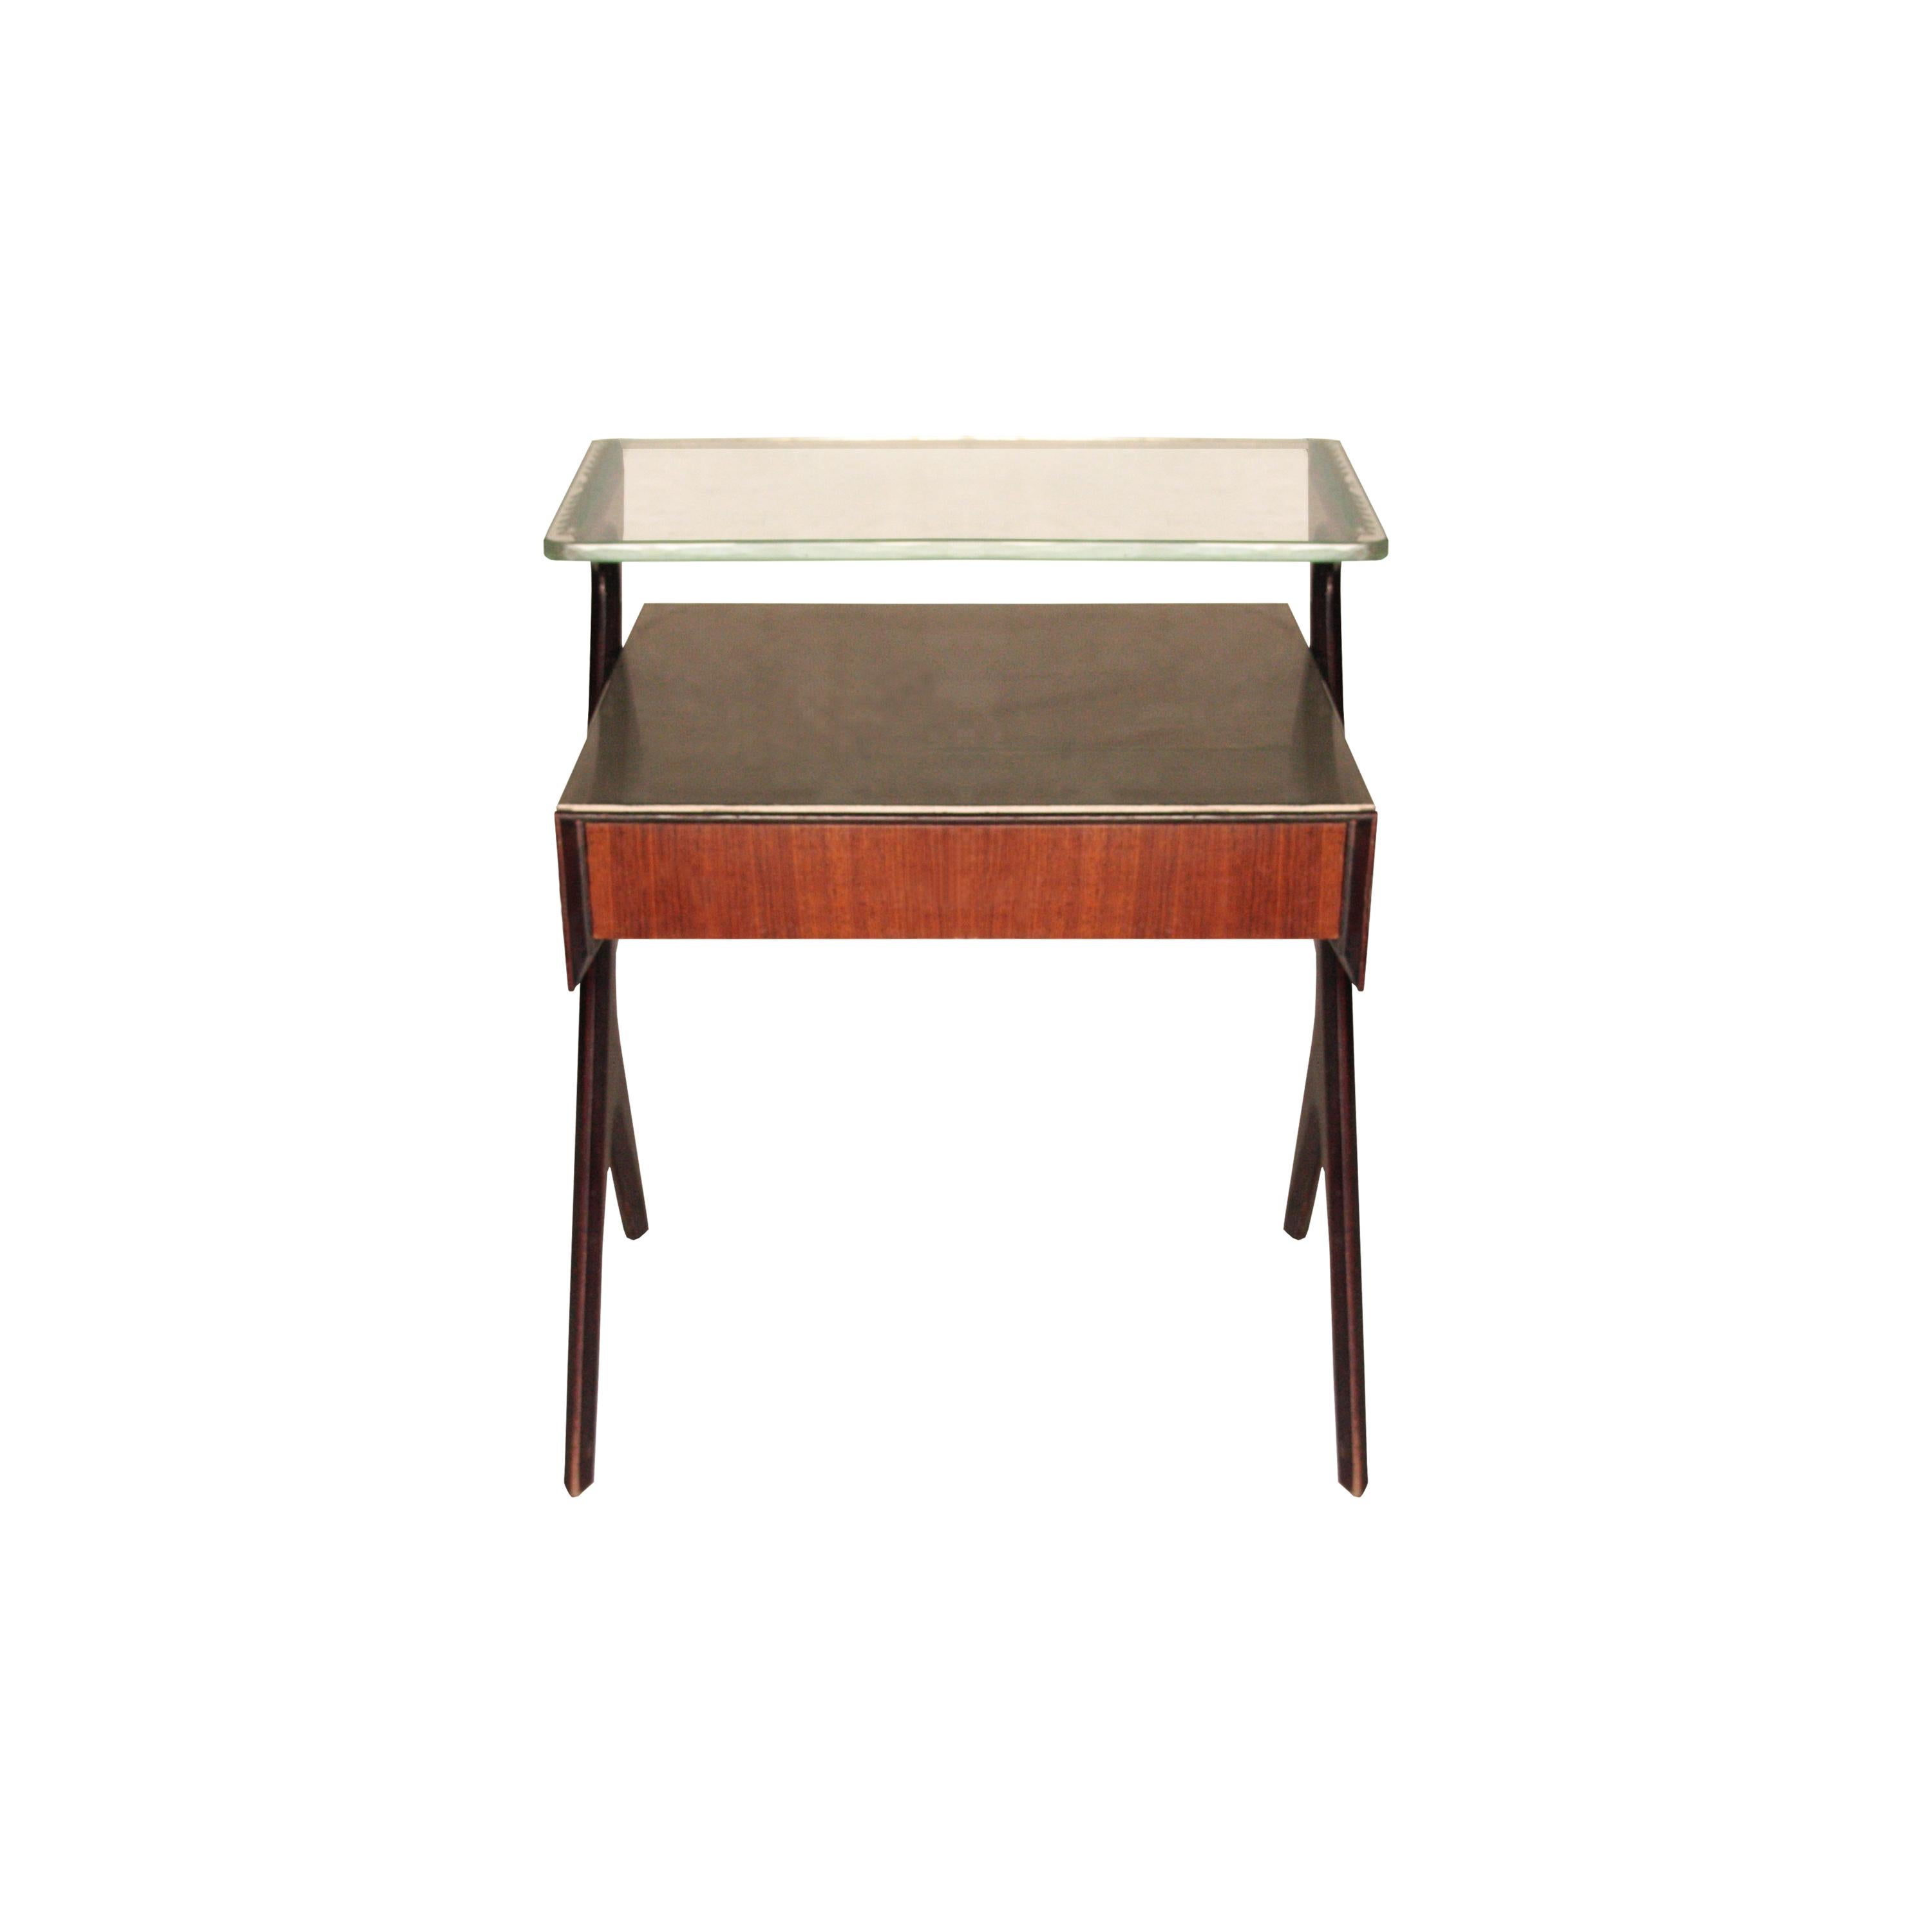 Pair of bedside tables made of wood, with drawer and glass top shelf and opaline envelope.